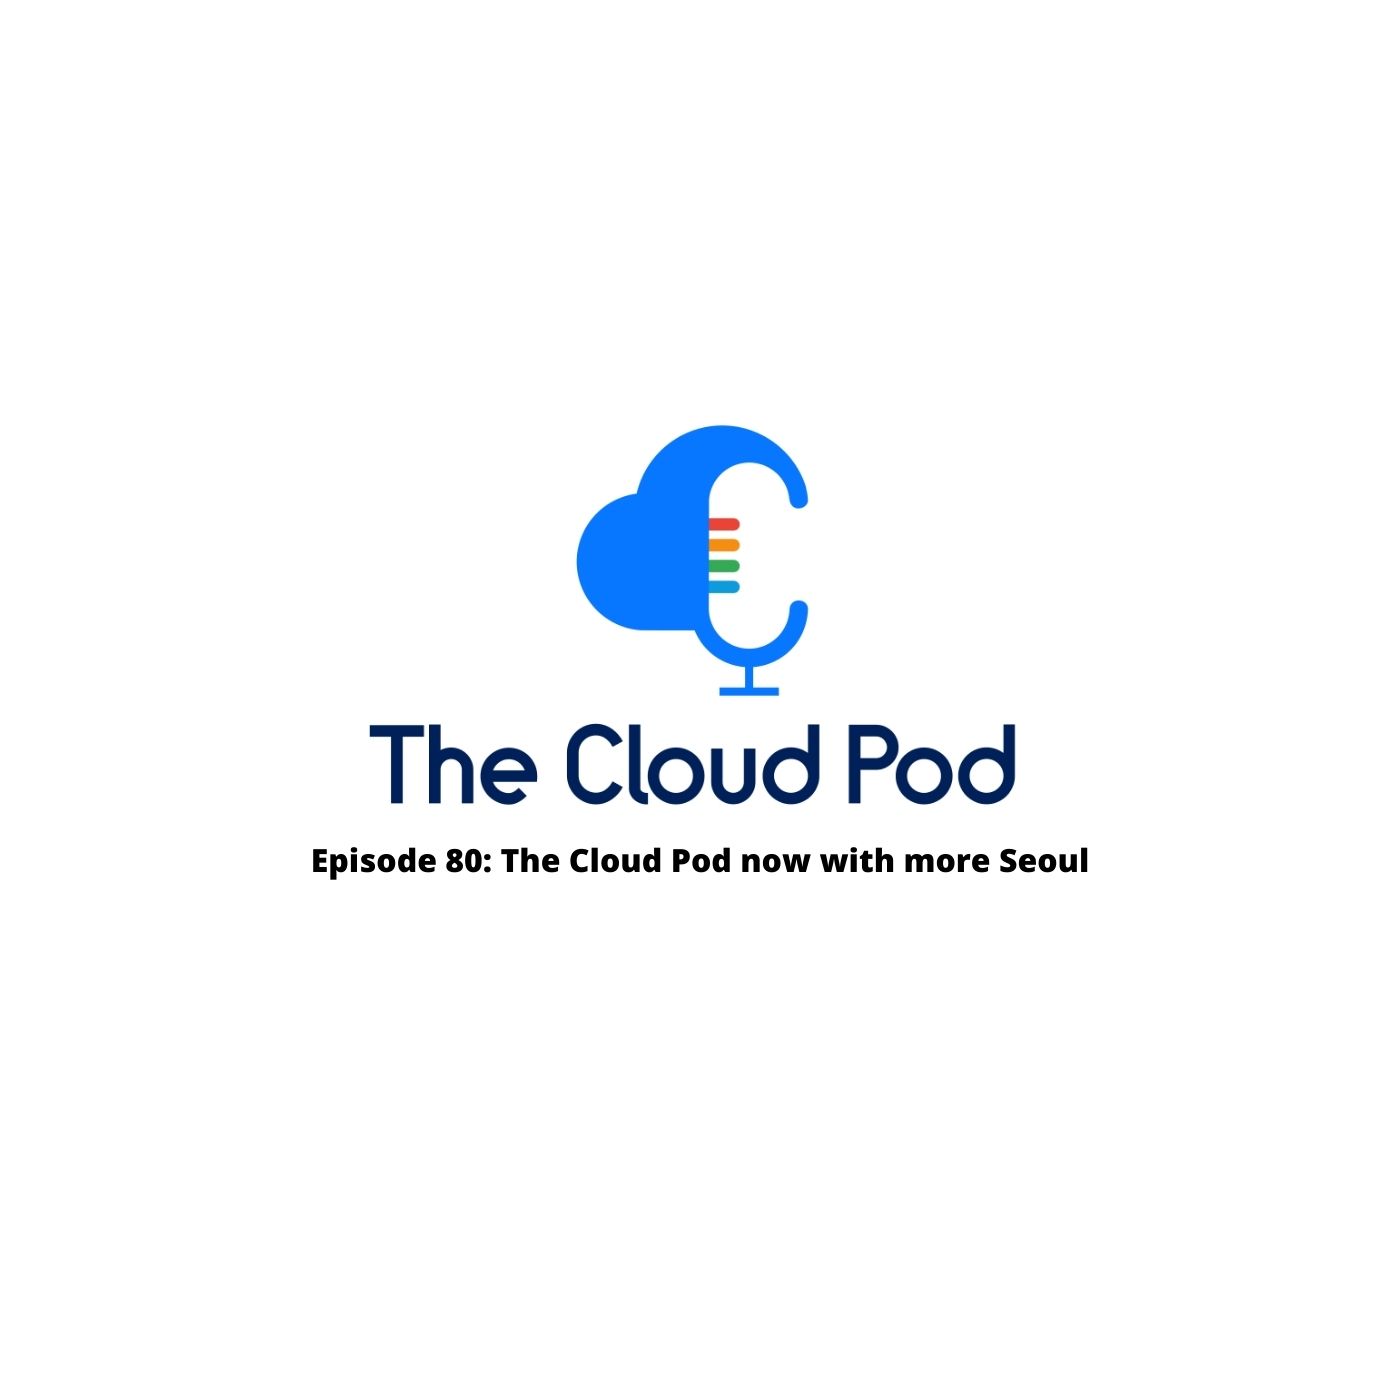 Episode 80: The Cloud Pod now with more Seoul